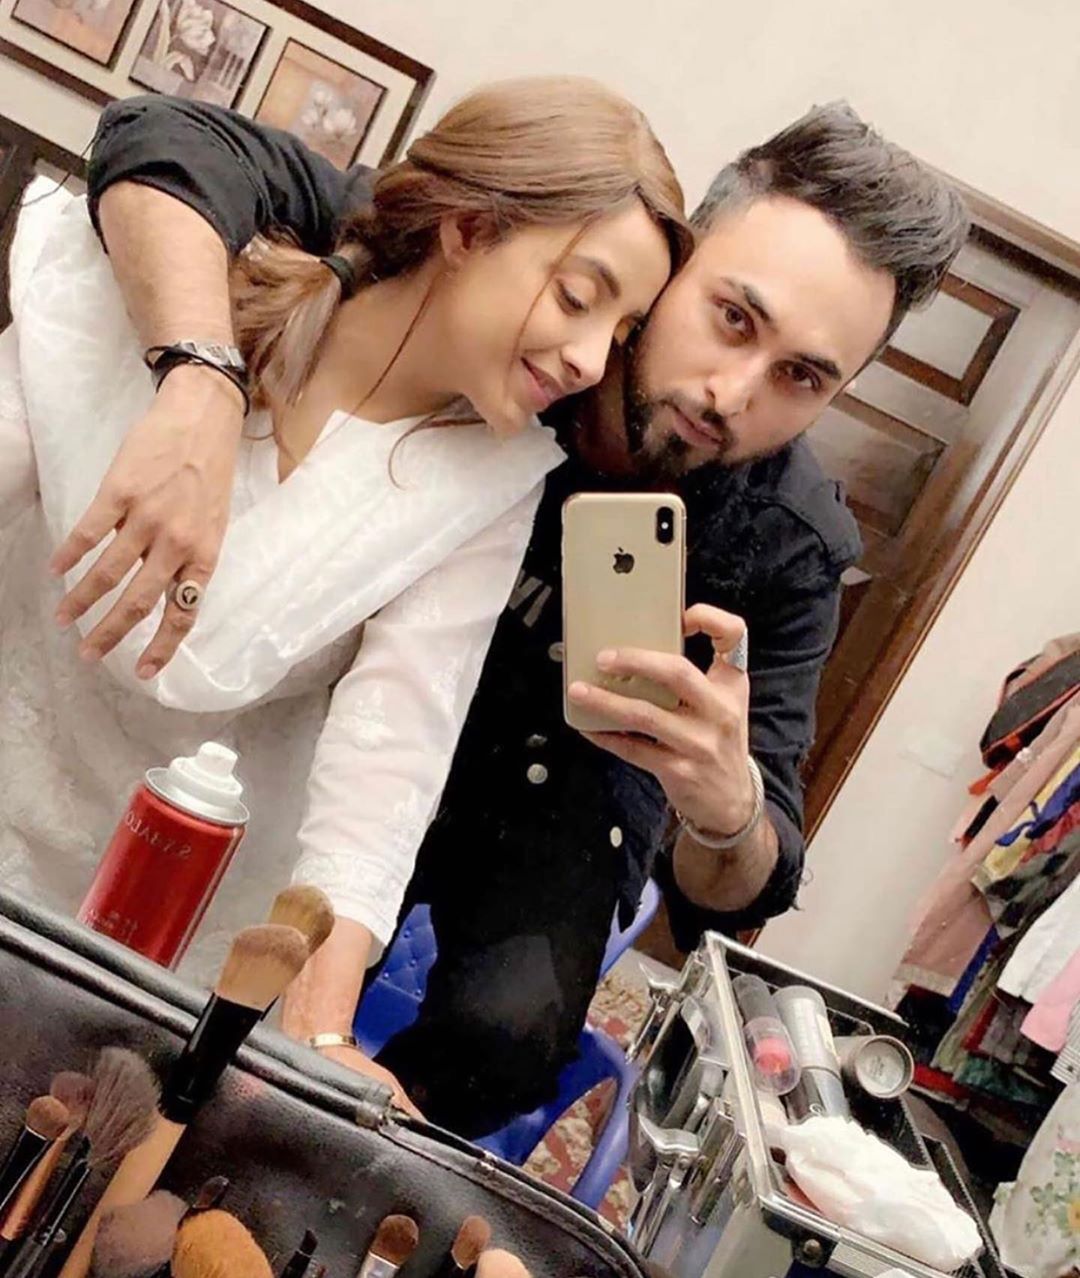 Latest Clicks of Newly Weds Couple Sanam Chaudhry and Somee Chohan